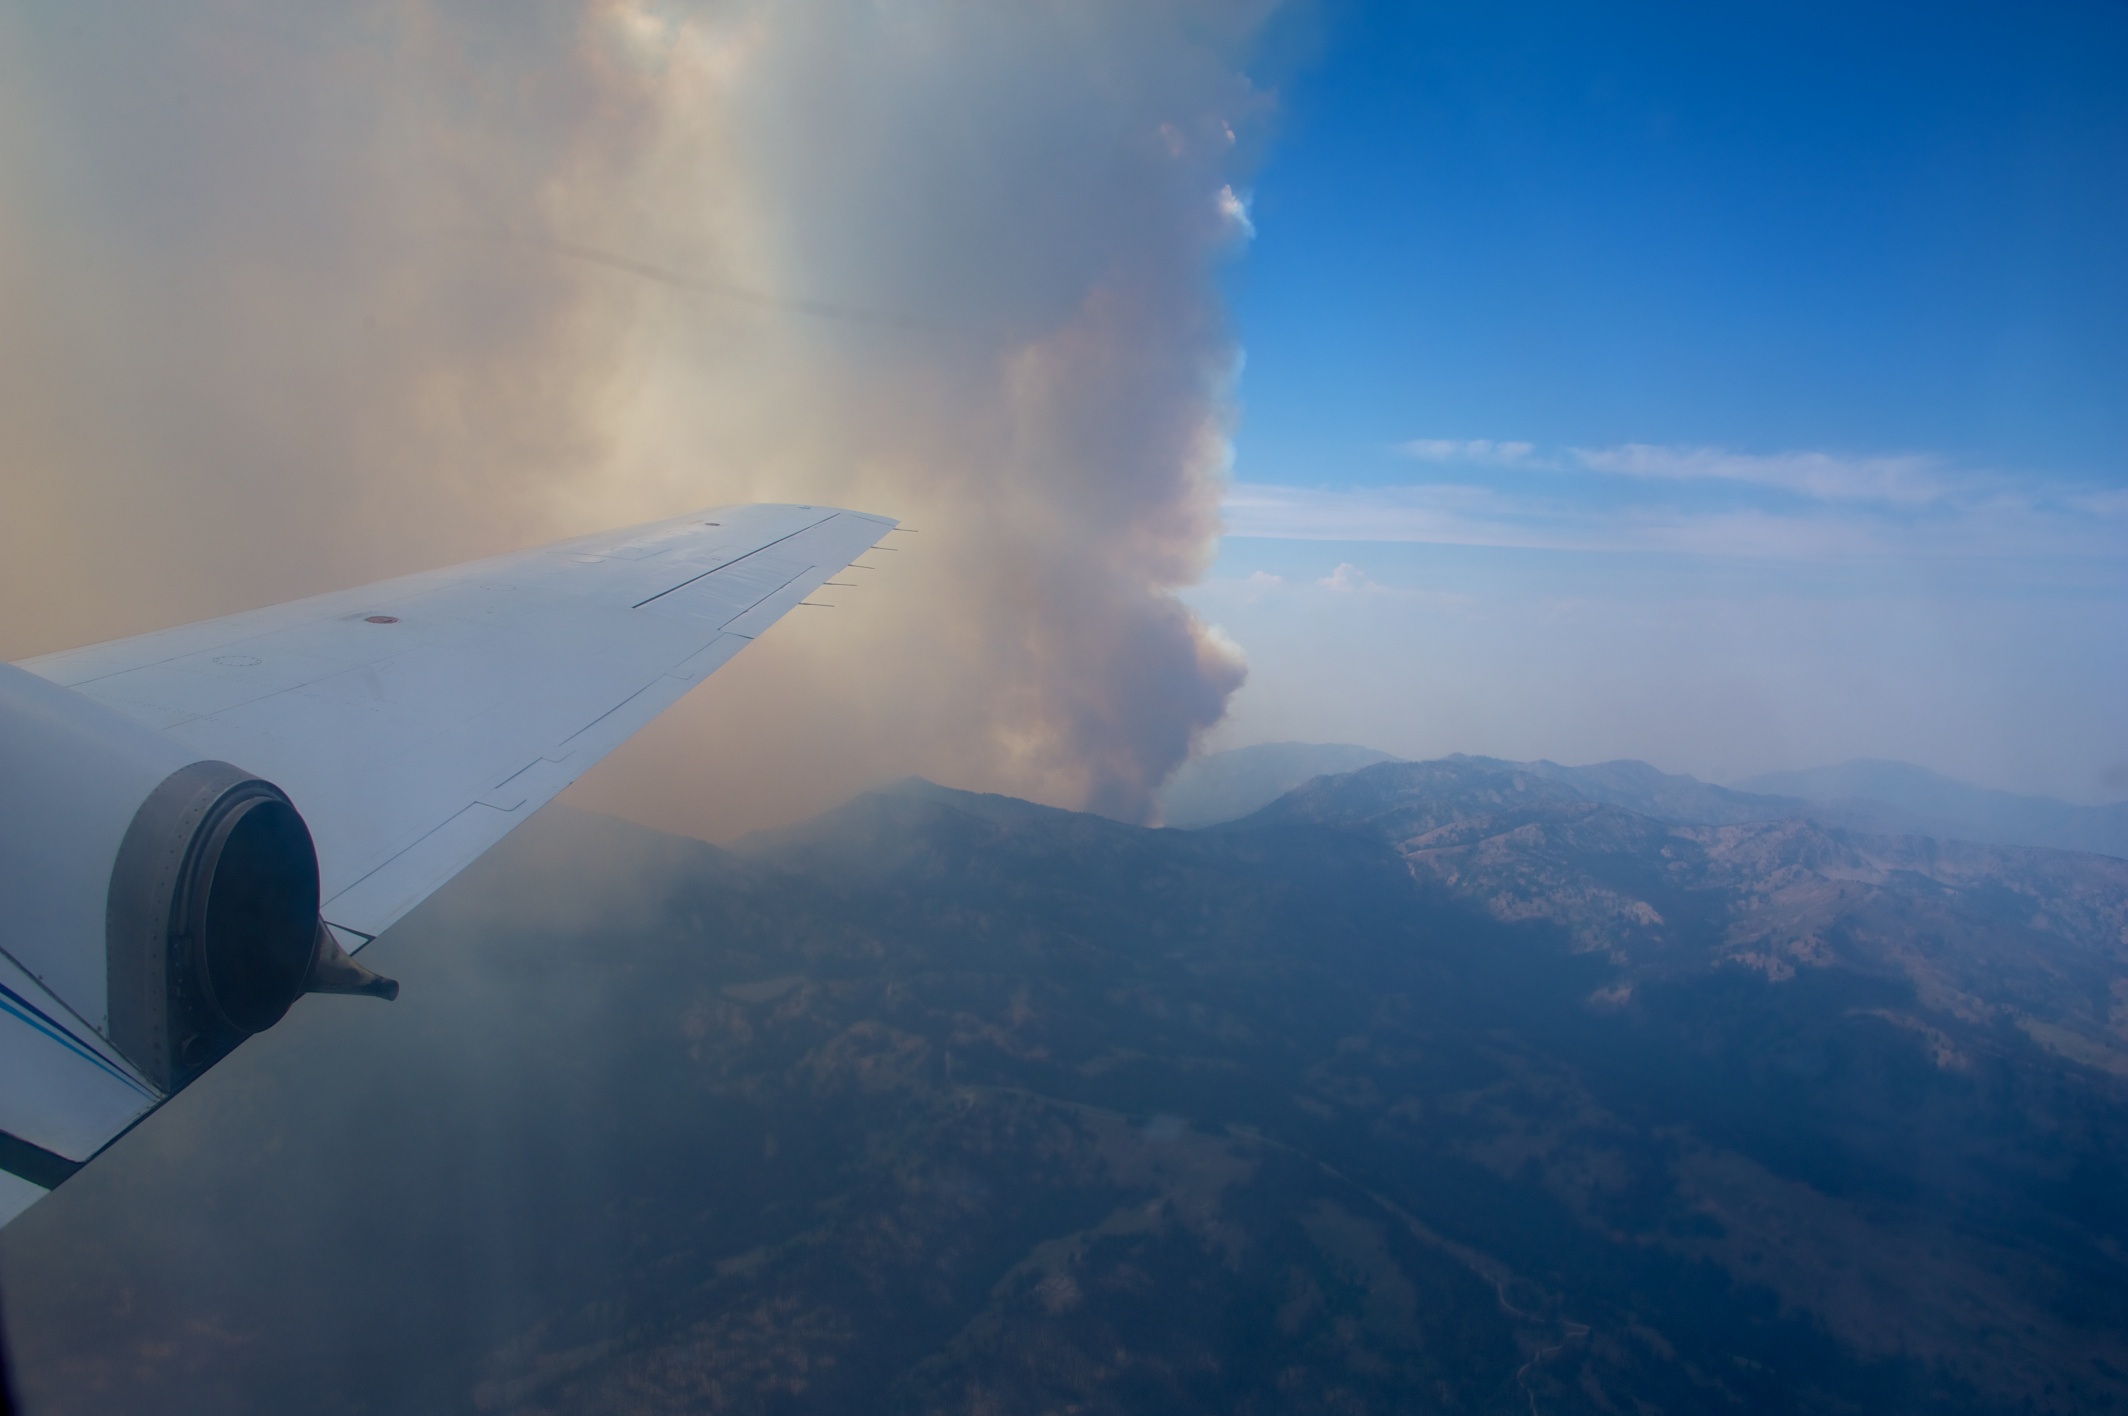 The wing of the Gulfstream-159 research aircraft extends into the camera frame. Just beyond the wing is a plume of wildfire smoke.